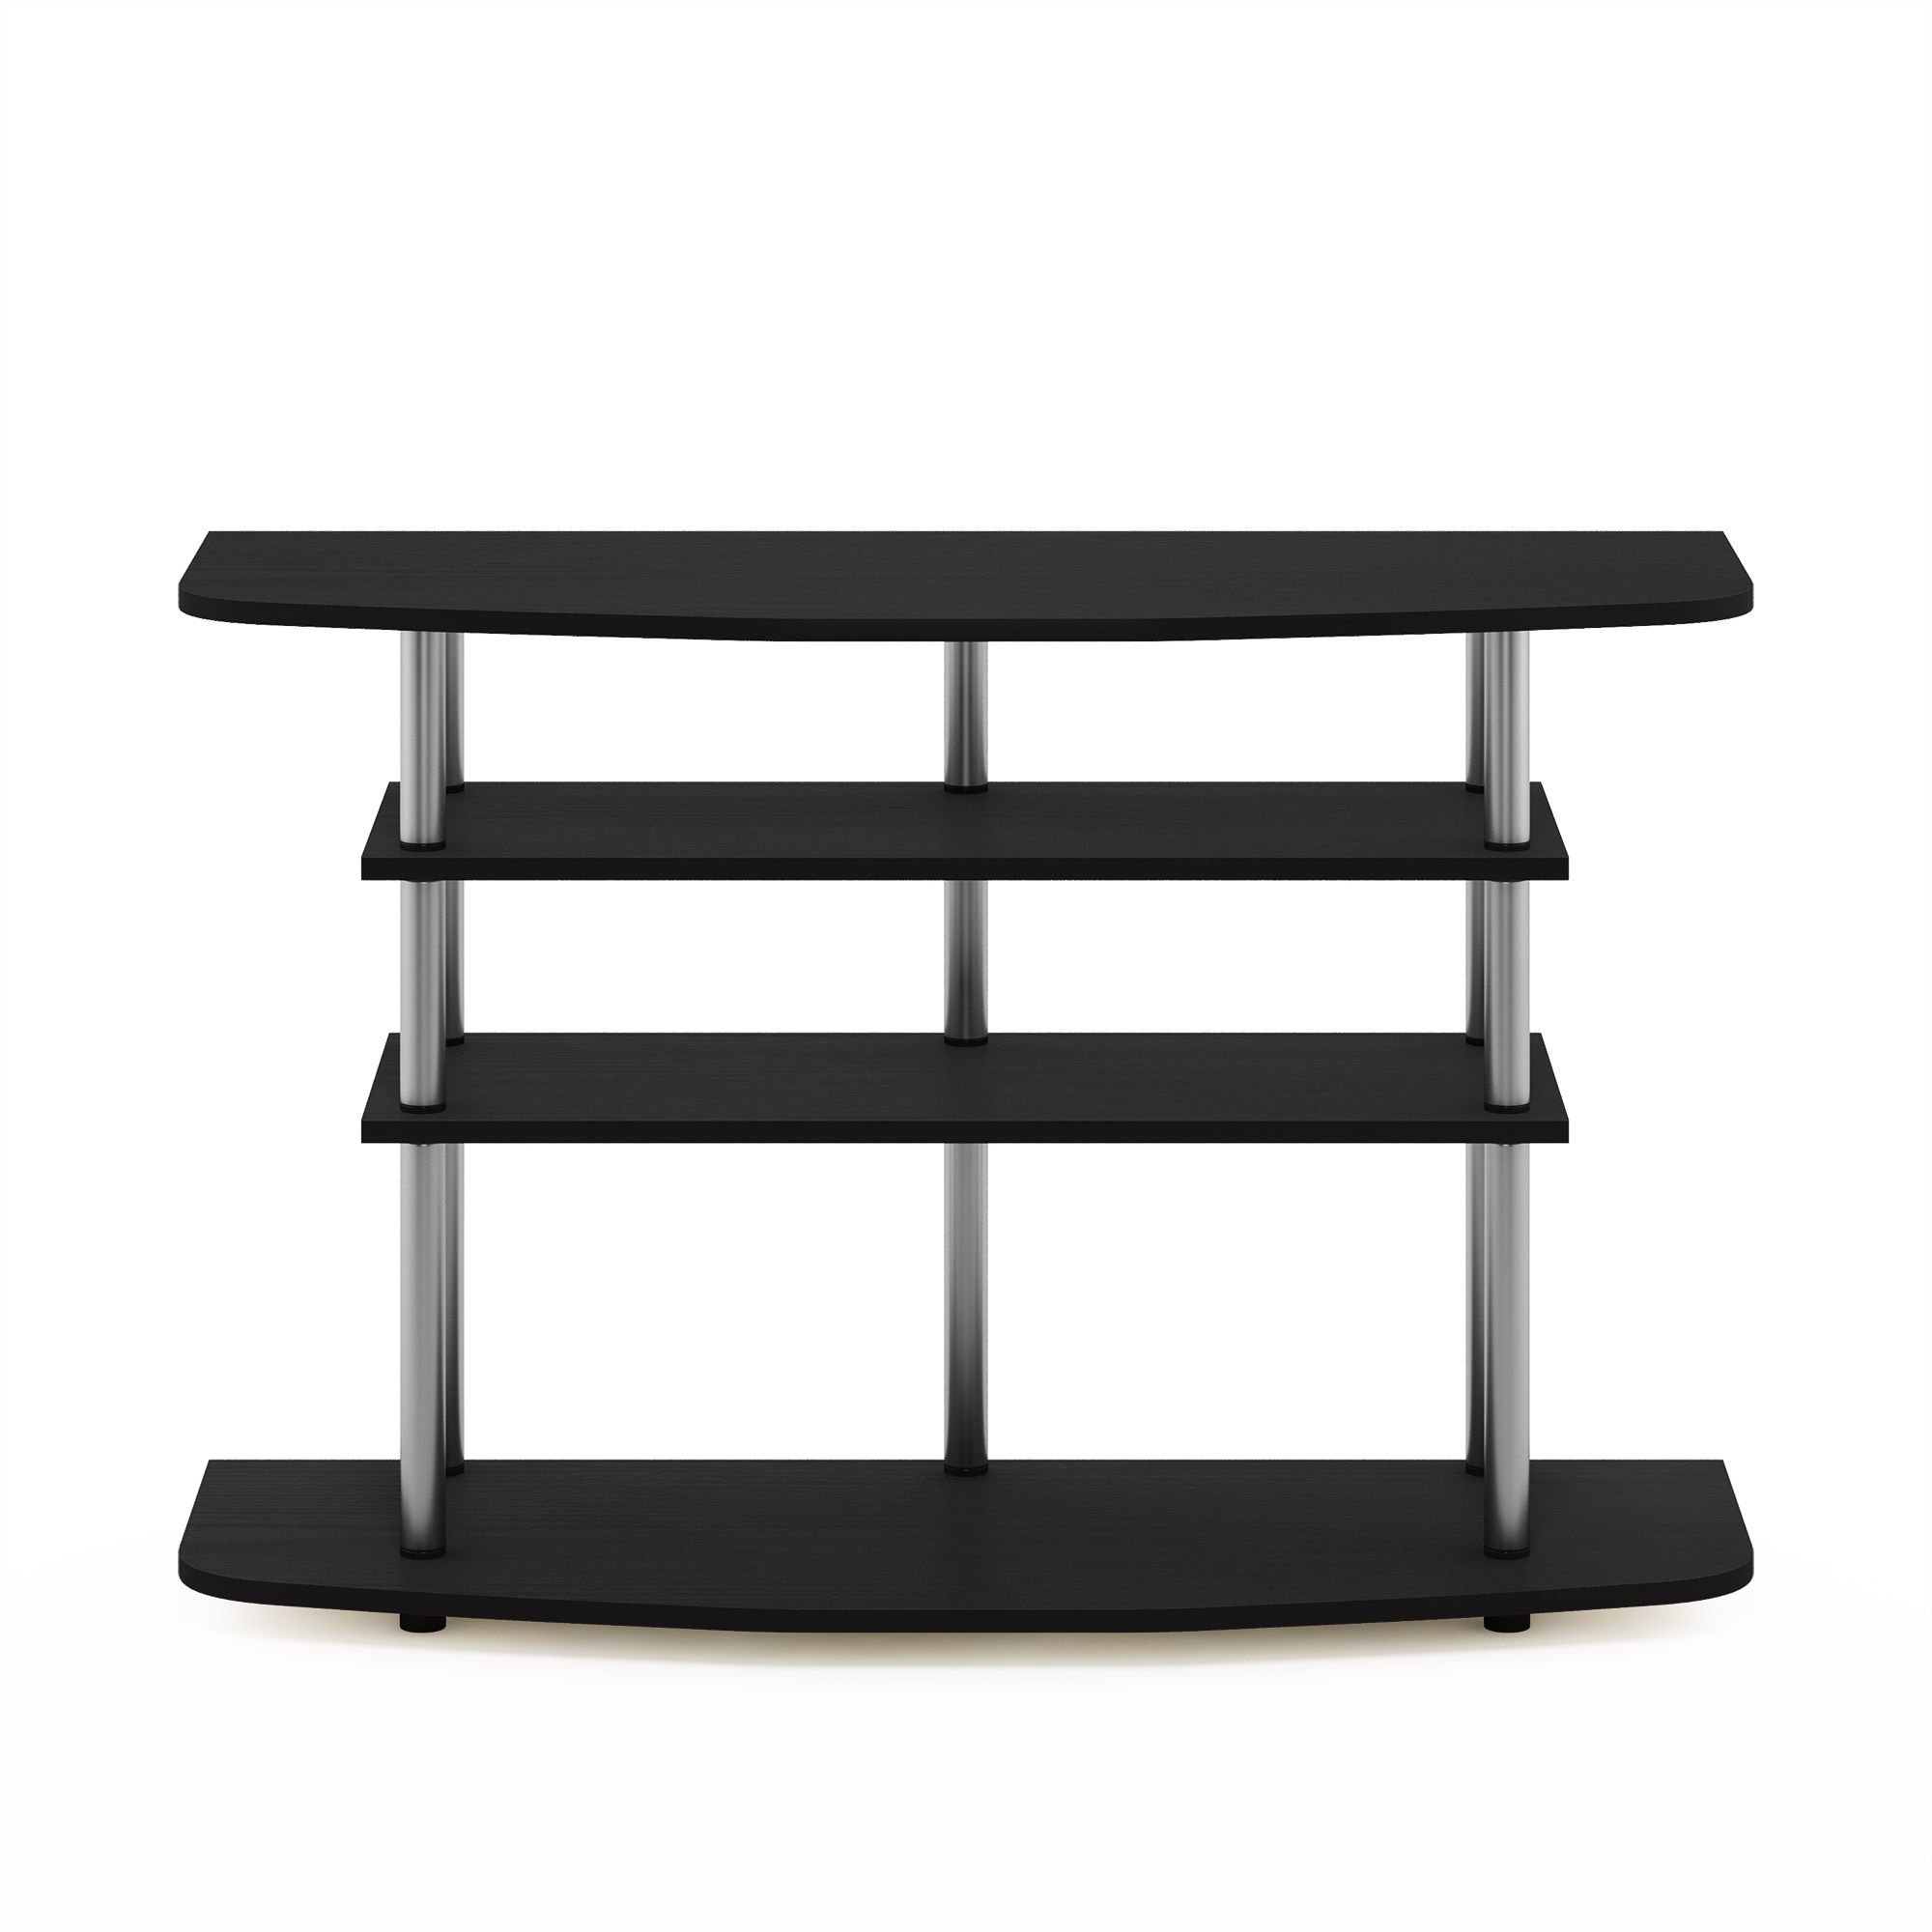 Furinno Frans Turn N Tube 4 Tier Tv Stand For Tv Up To 46 With Regard To Furinno Jaya Large Tv Stands With Storage Bin (View 7 of 20)